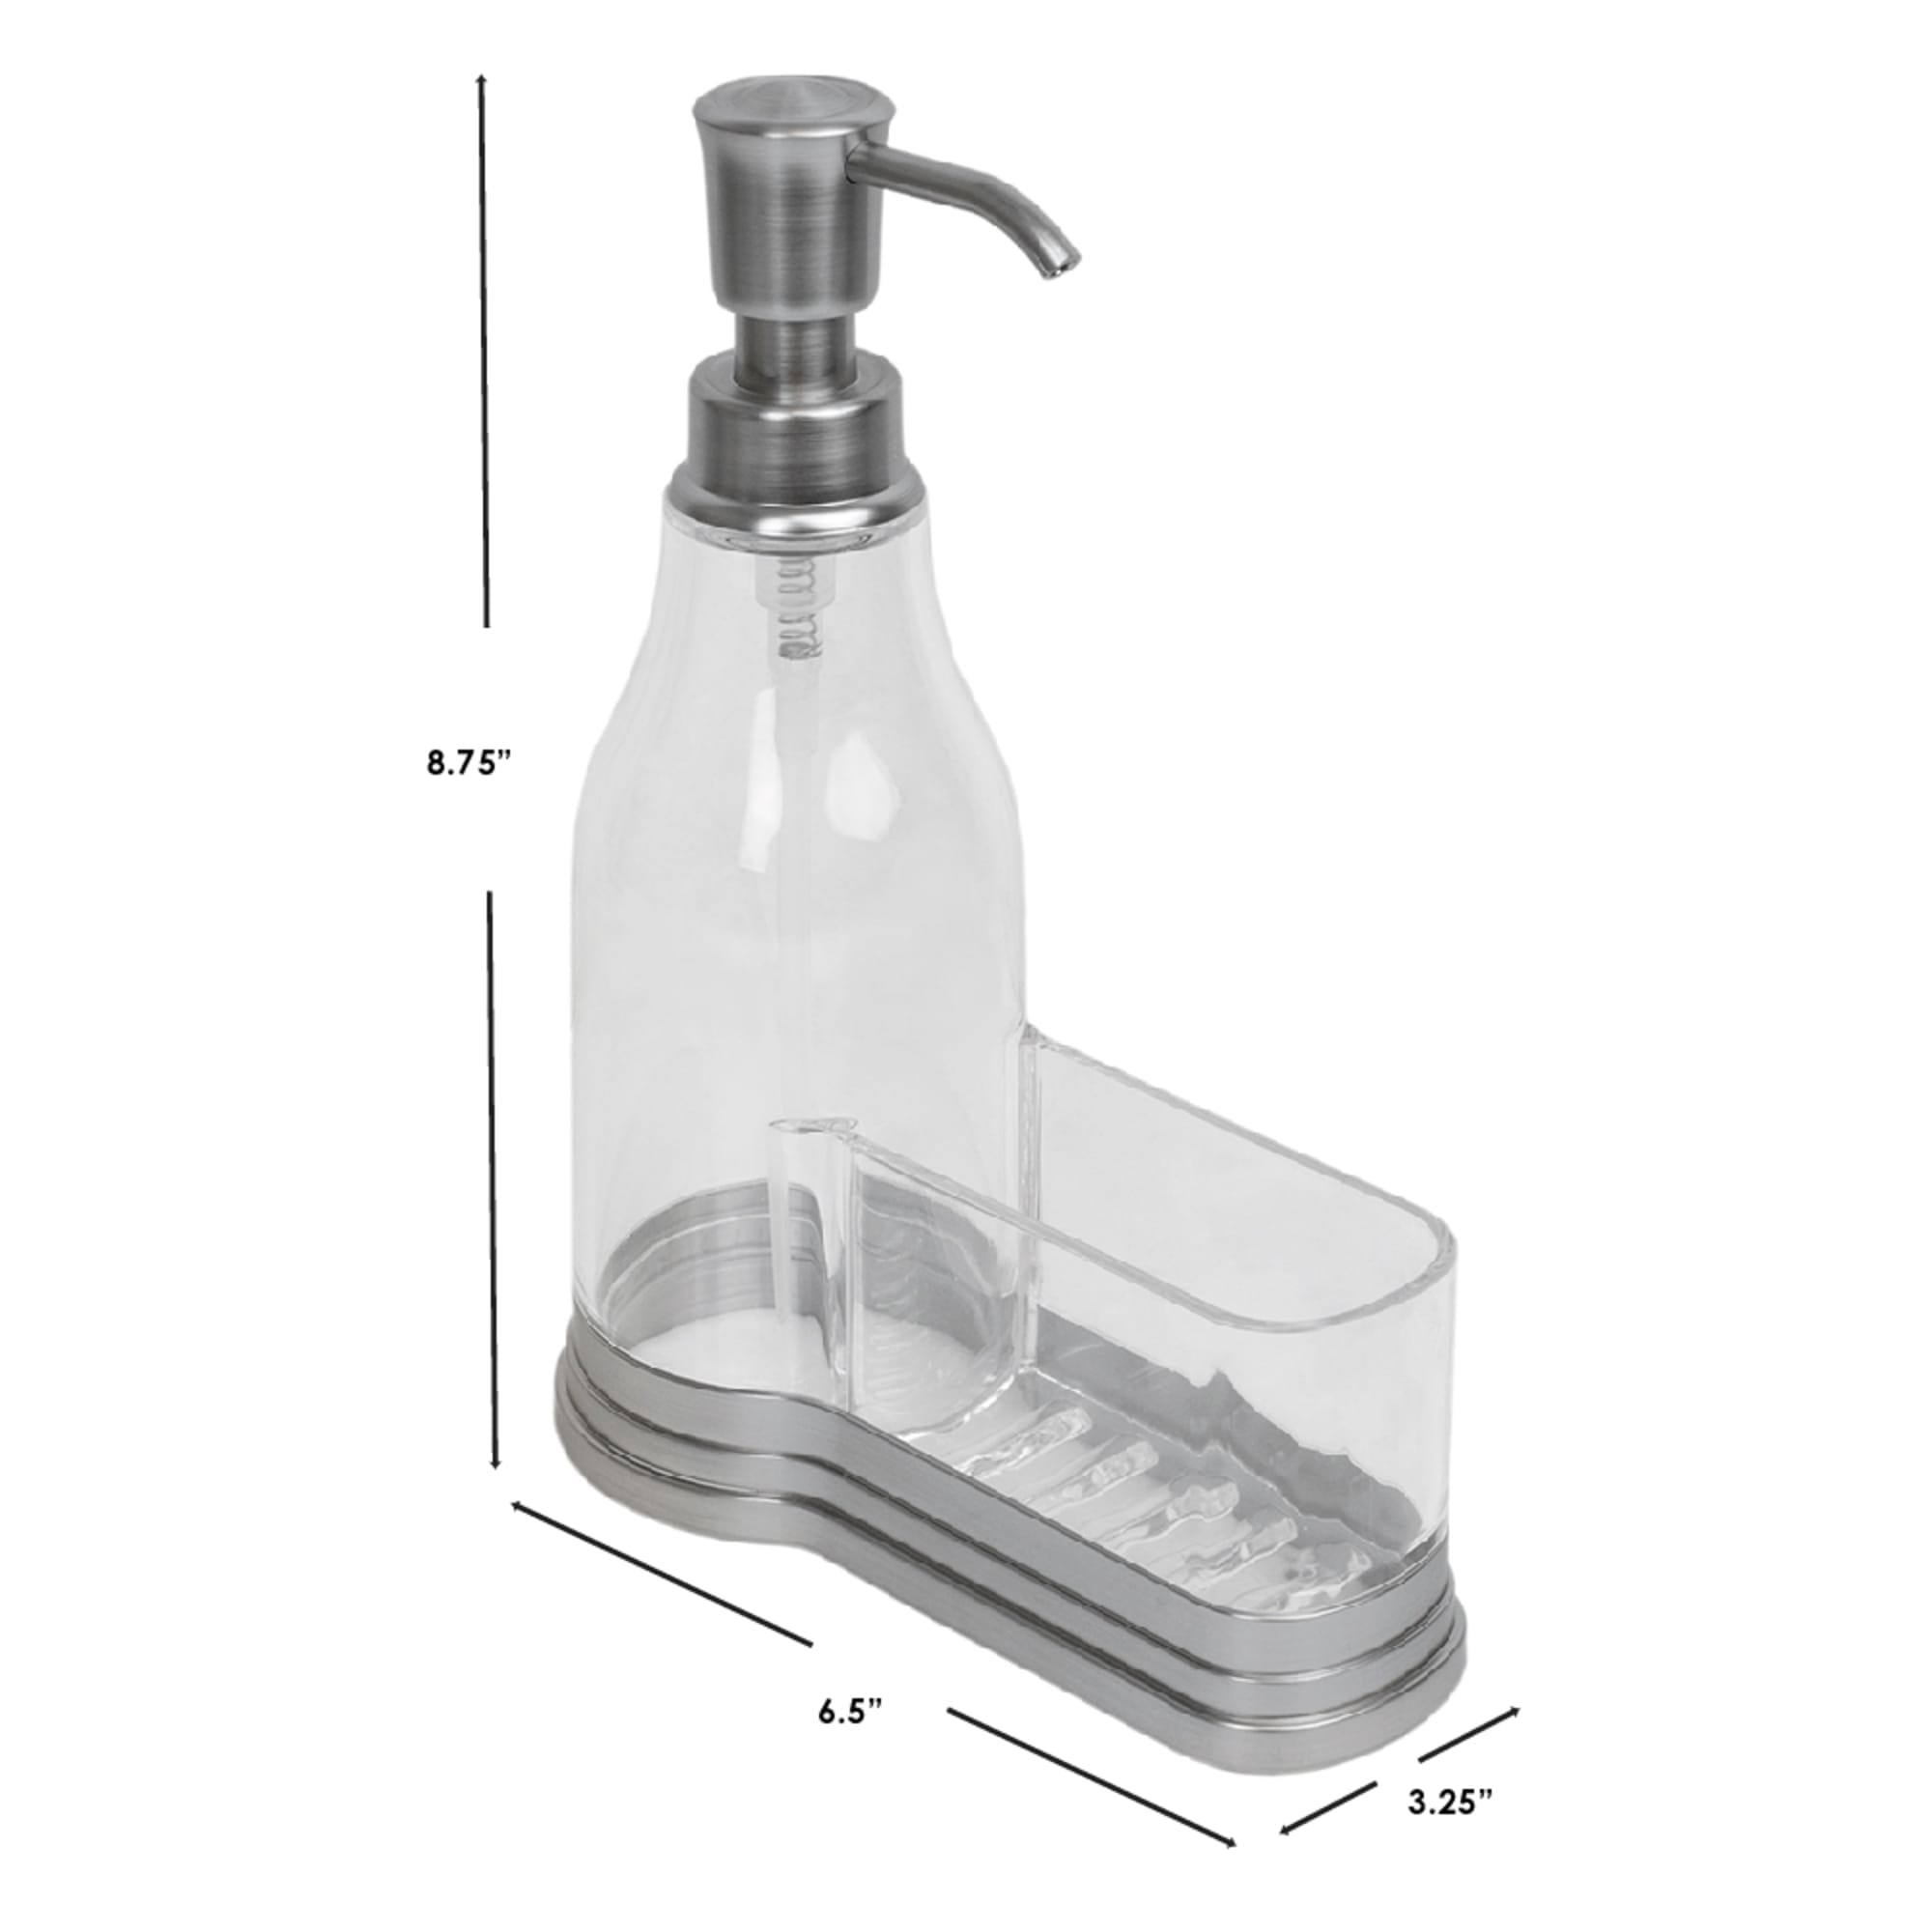 Home Basics Plastic Soap Dispenser with Brushed Steel Top and Fixed Sponge Holder, Chrome $6.00 EACH, CASE PACK OF 12